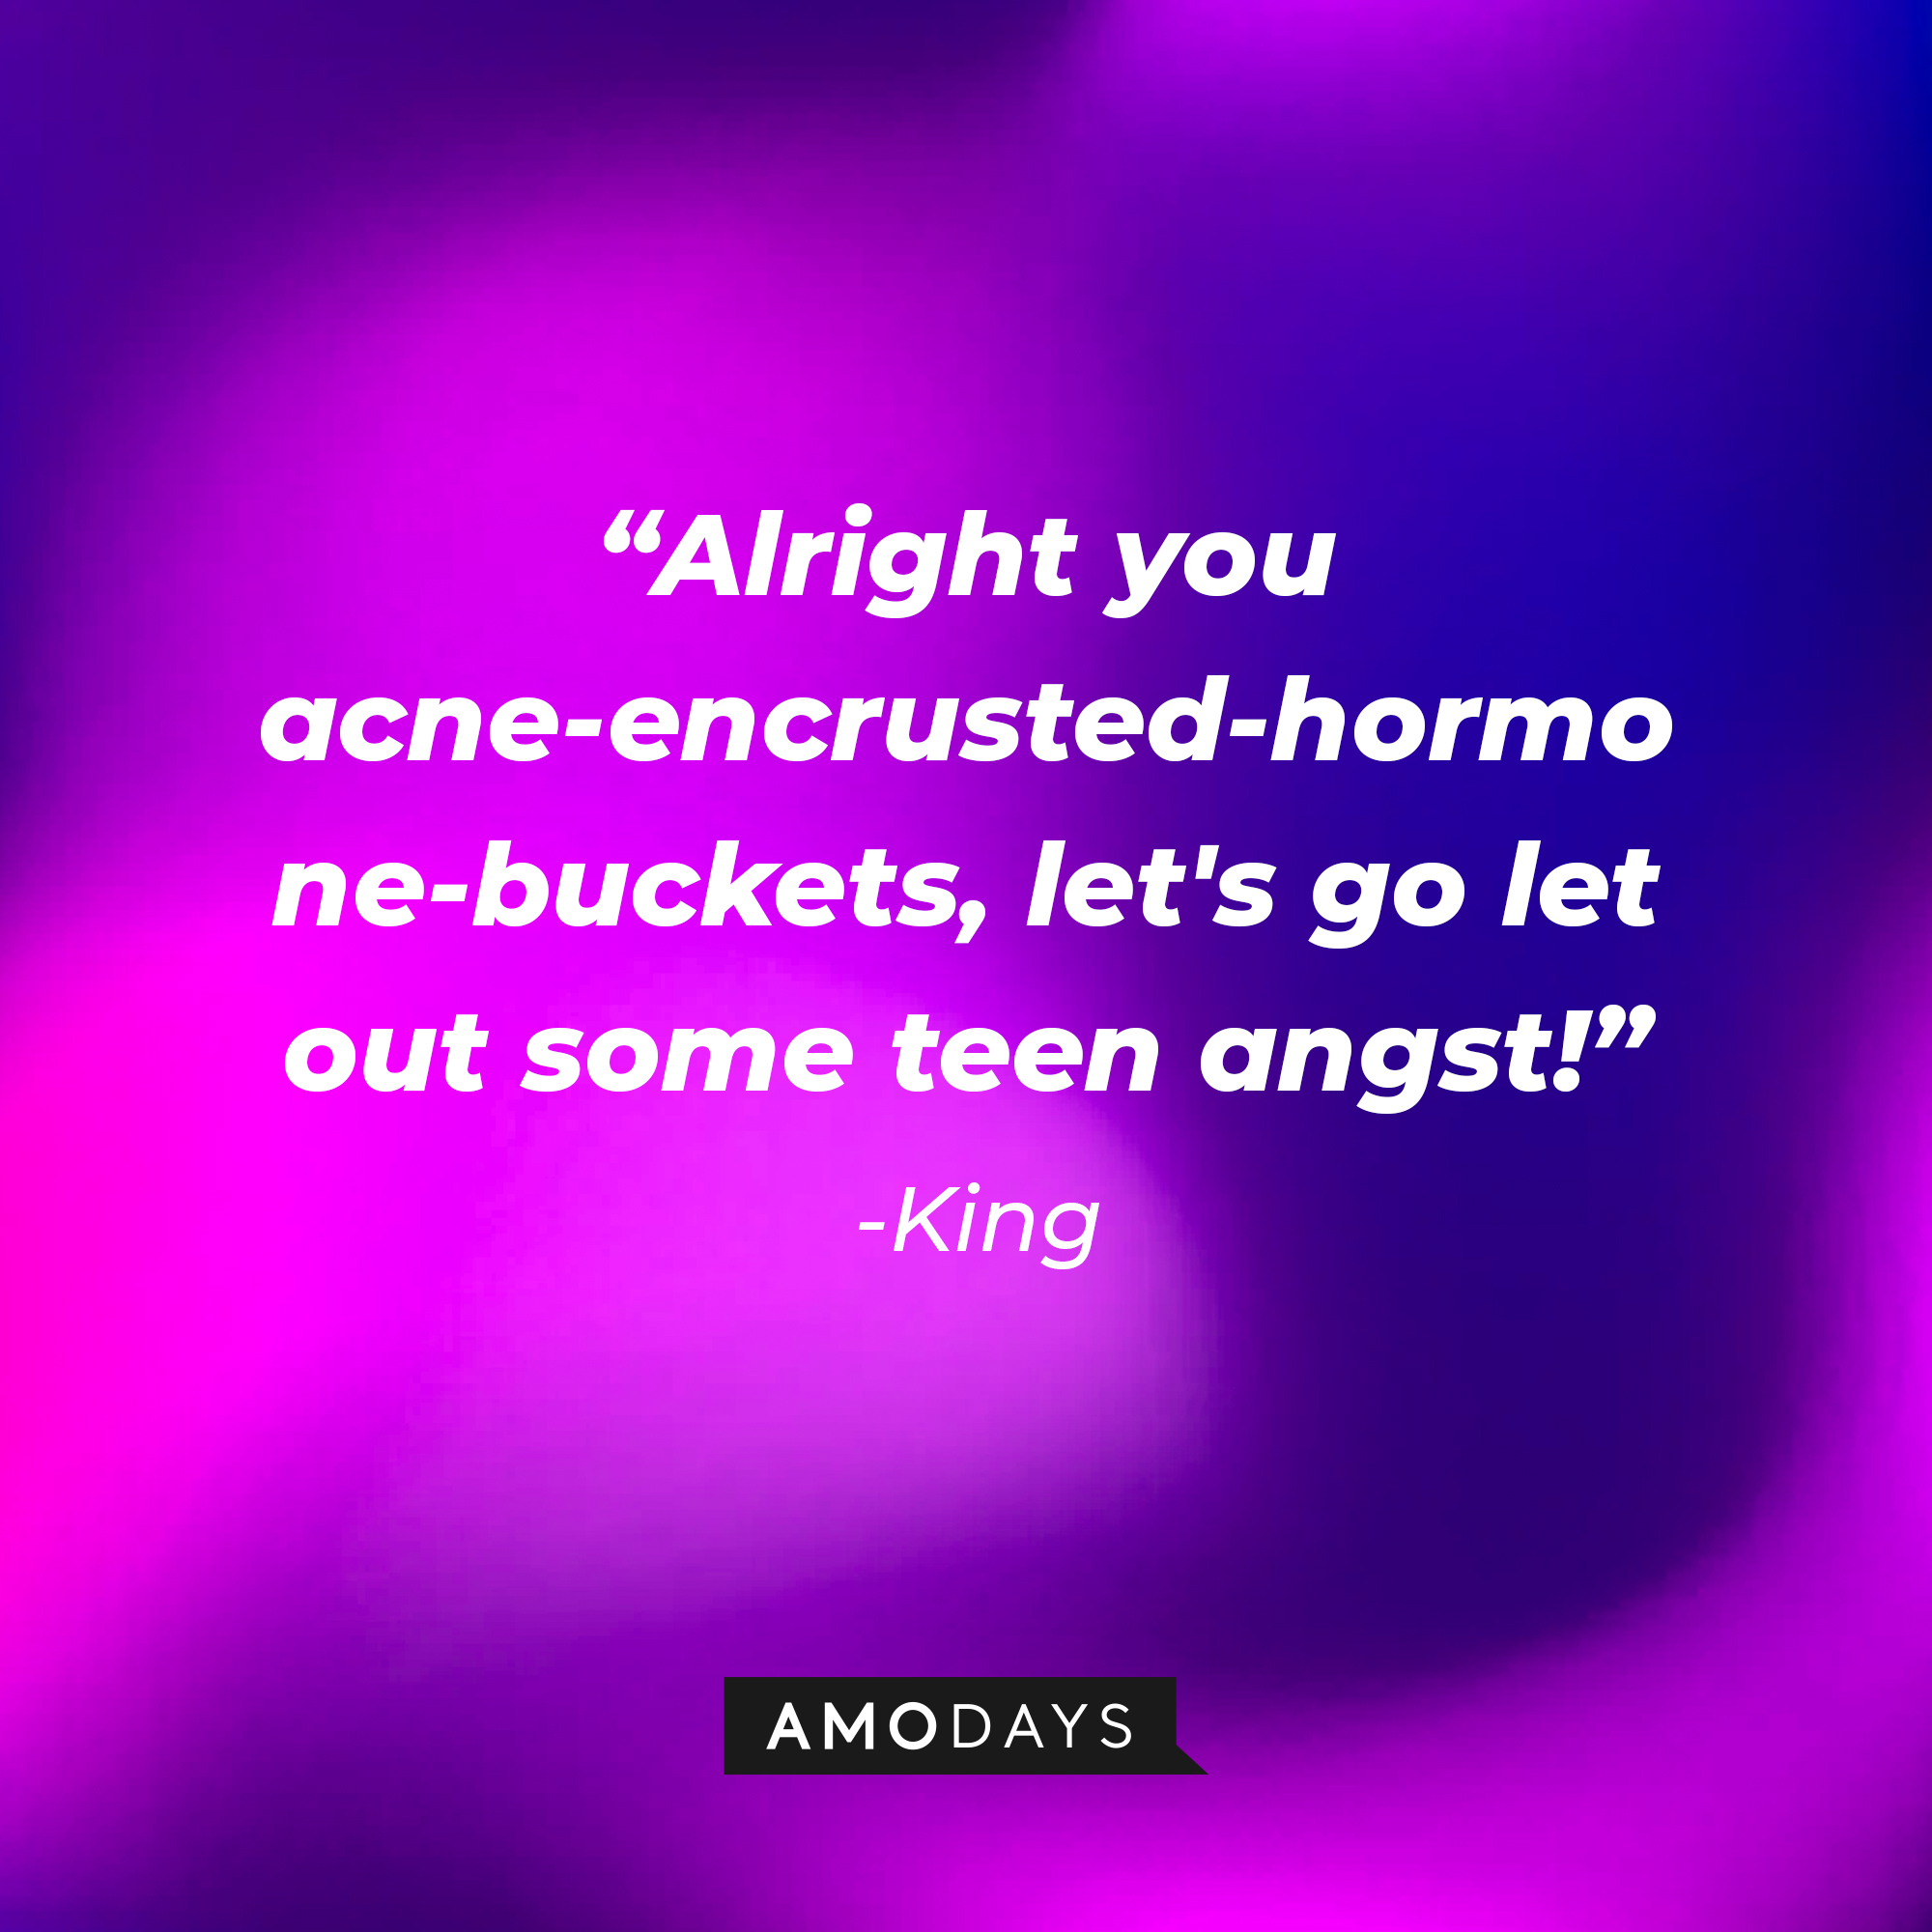 A photo with King's quote, "Alright you acne-encrusted-hormone-buckets, let's go let out some teen angst!" | Source: Amodays